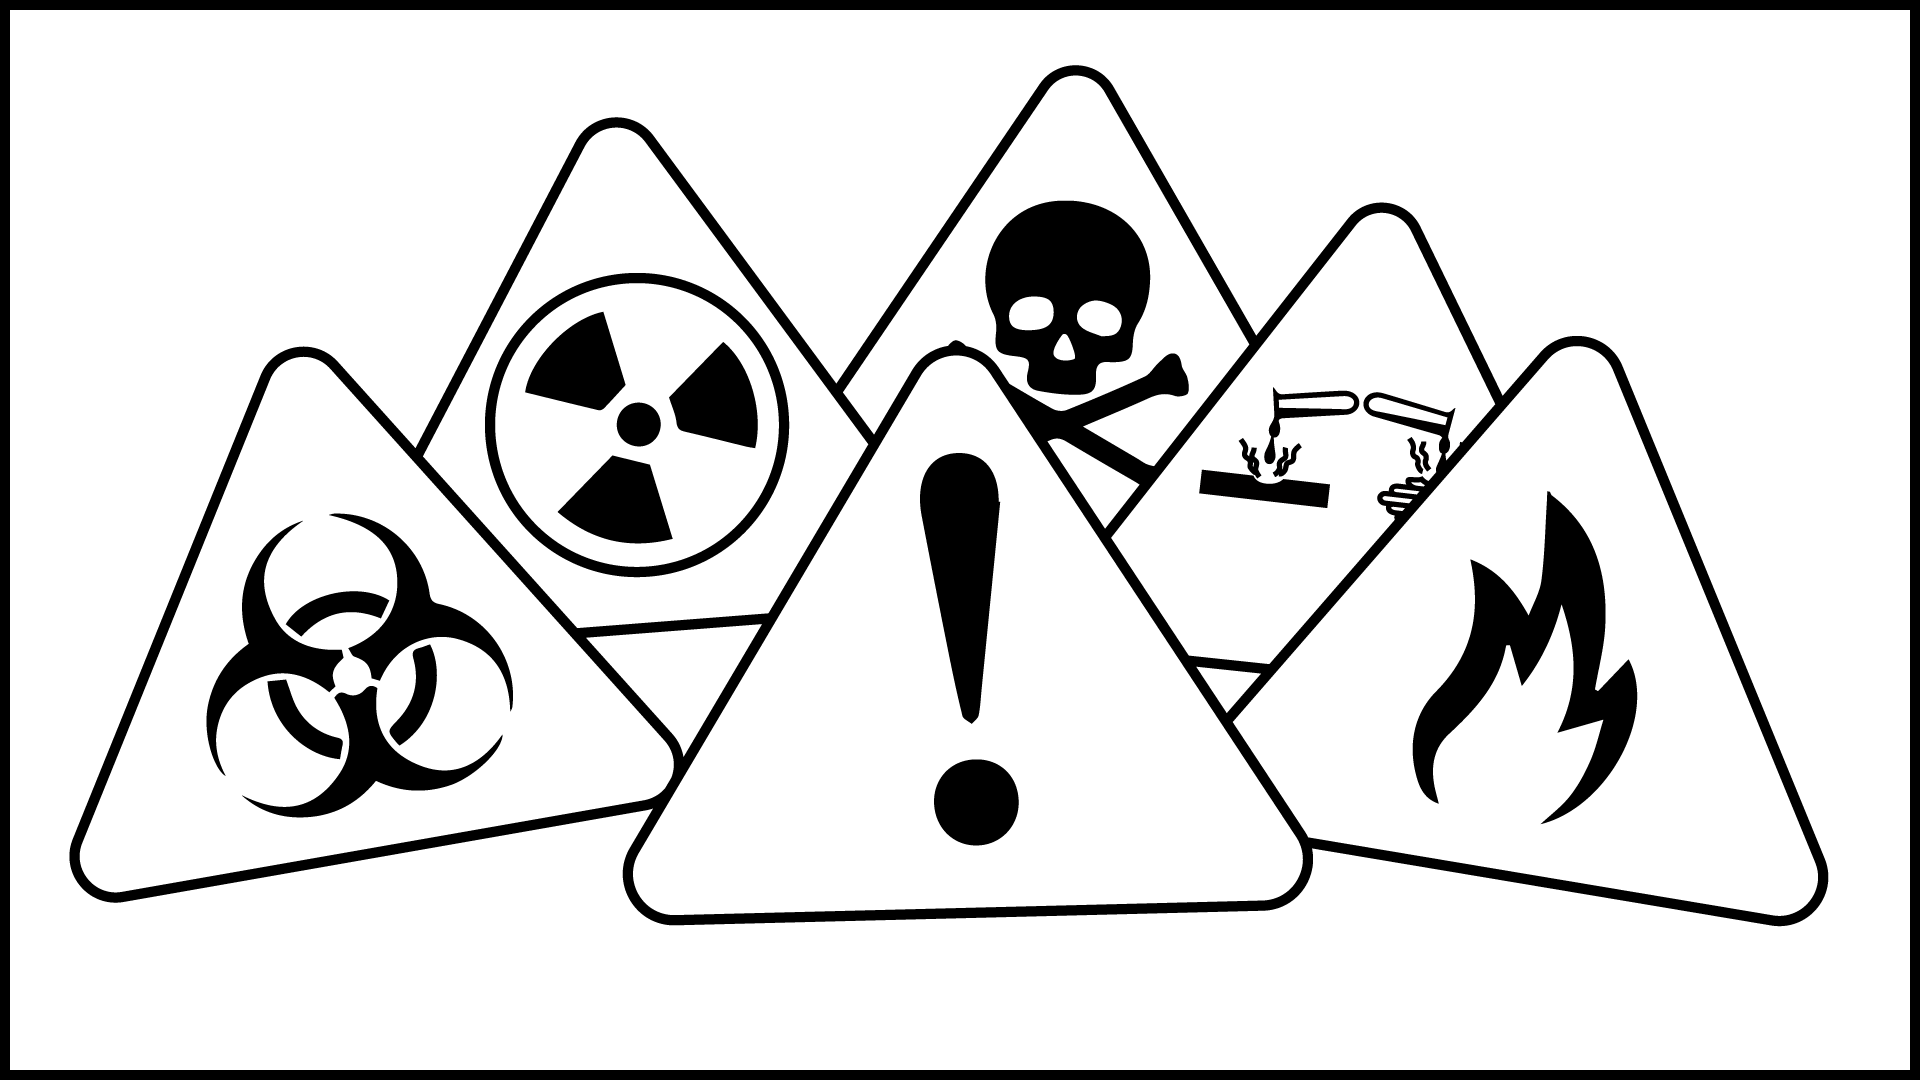 Poison, Danger, Girl, Child, Kid, Prevention, Toxic, Warning, Chemical,  Disease, png | PNGWing